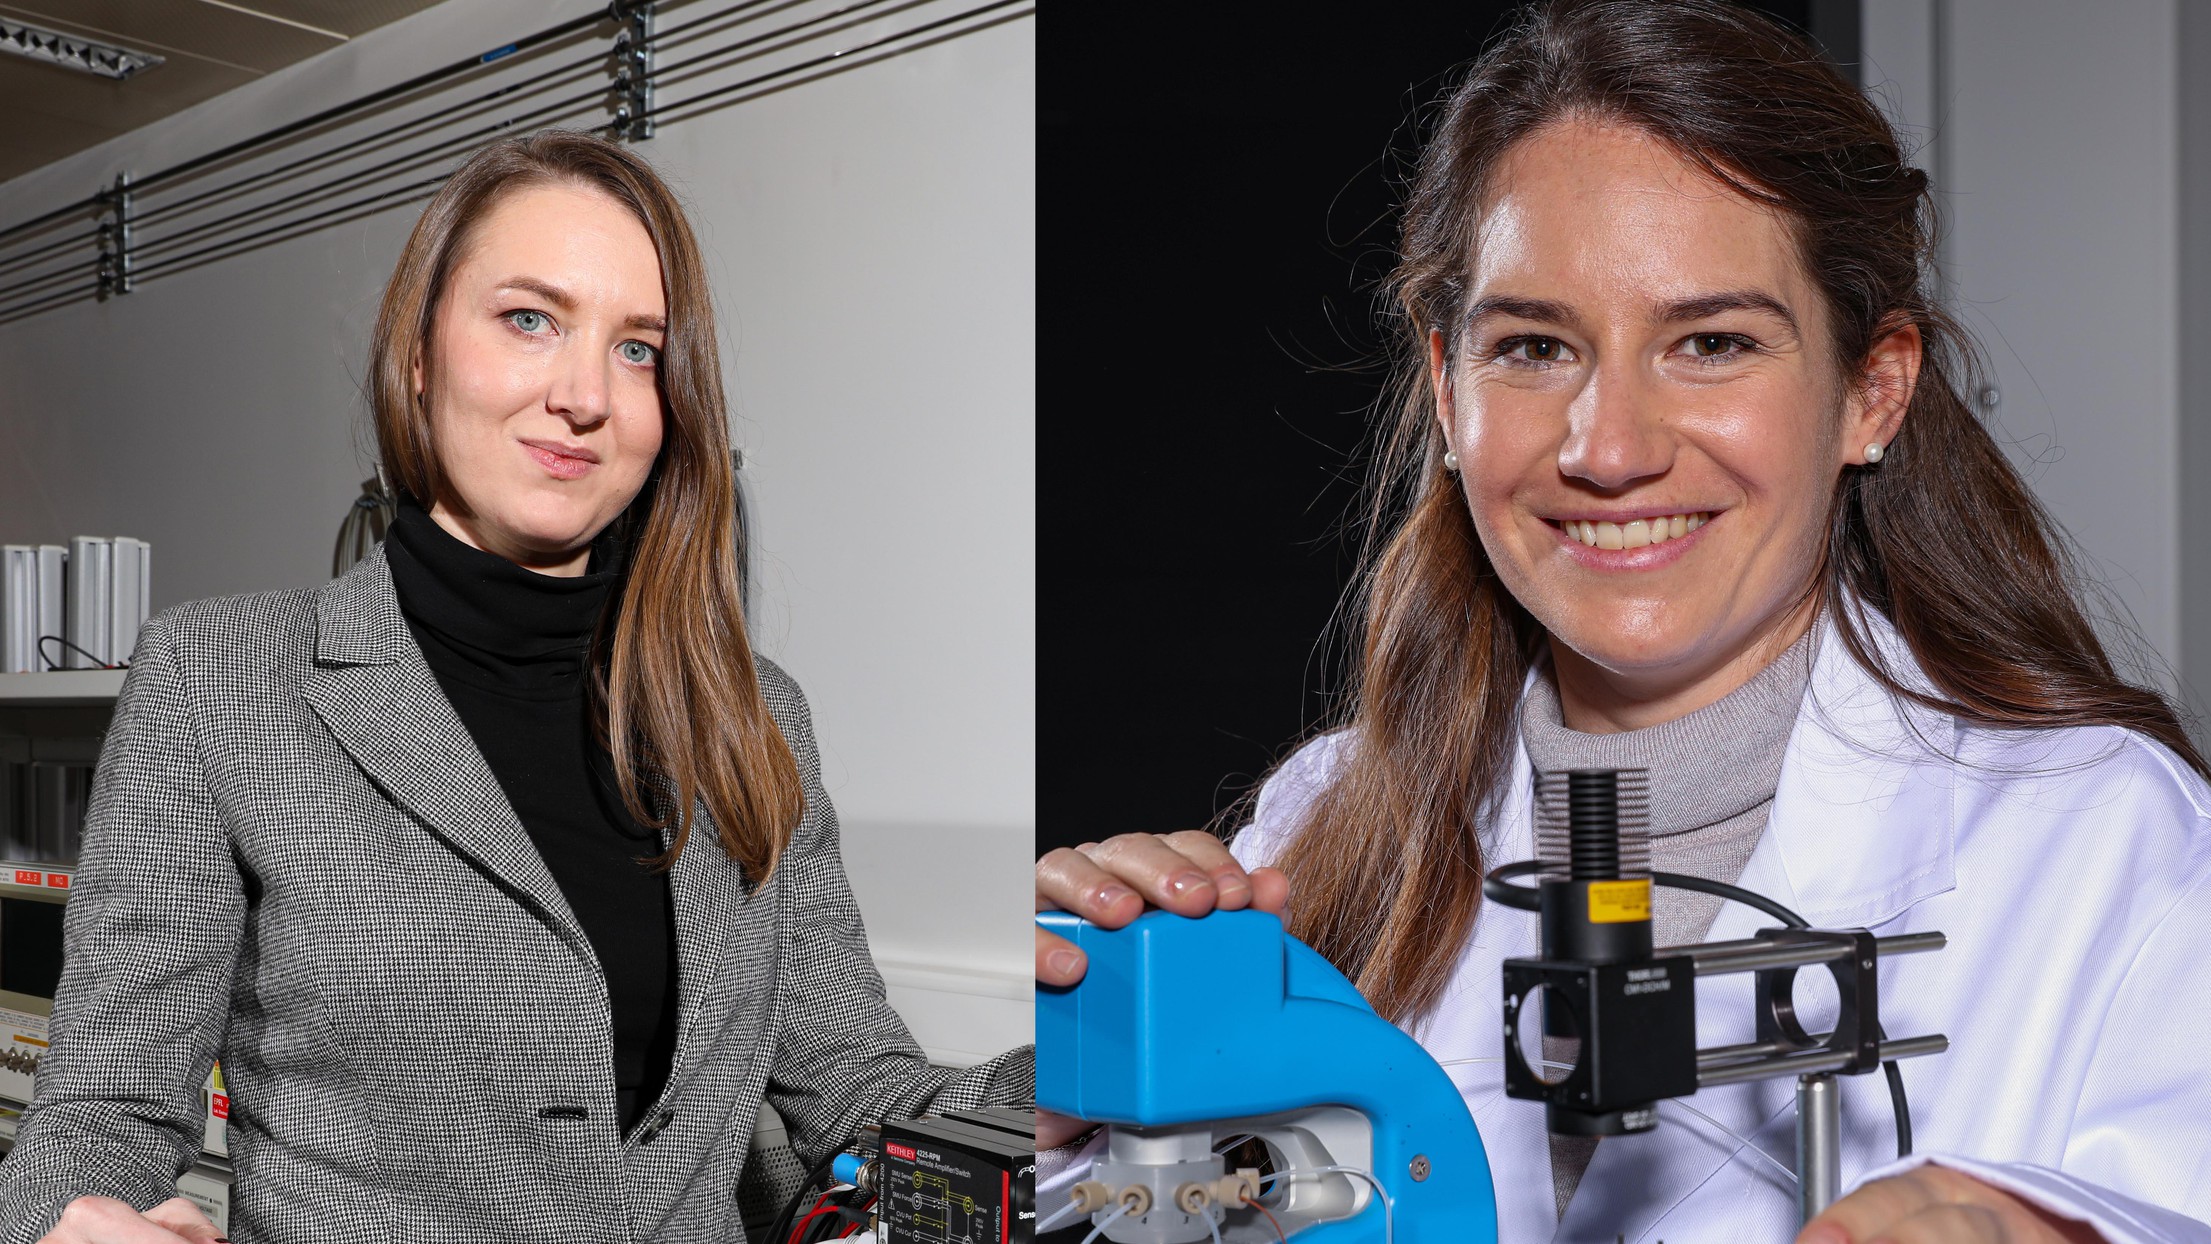 Two young female entrepreneurs from EPFL win the Musy Award